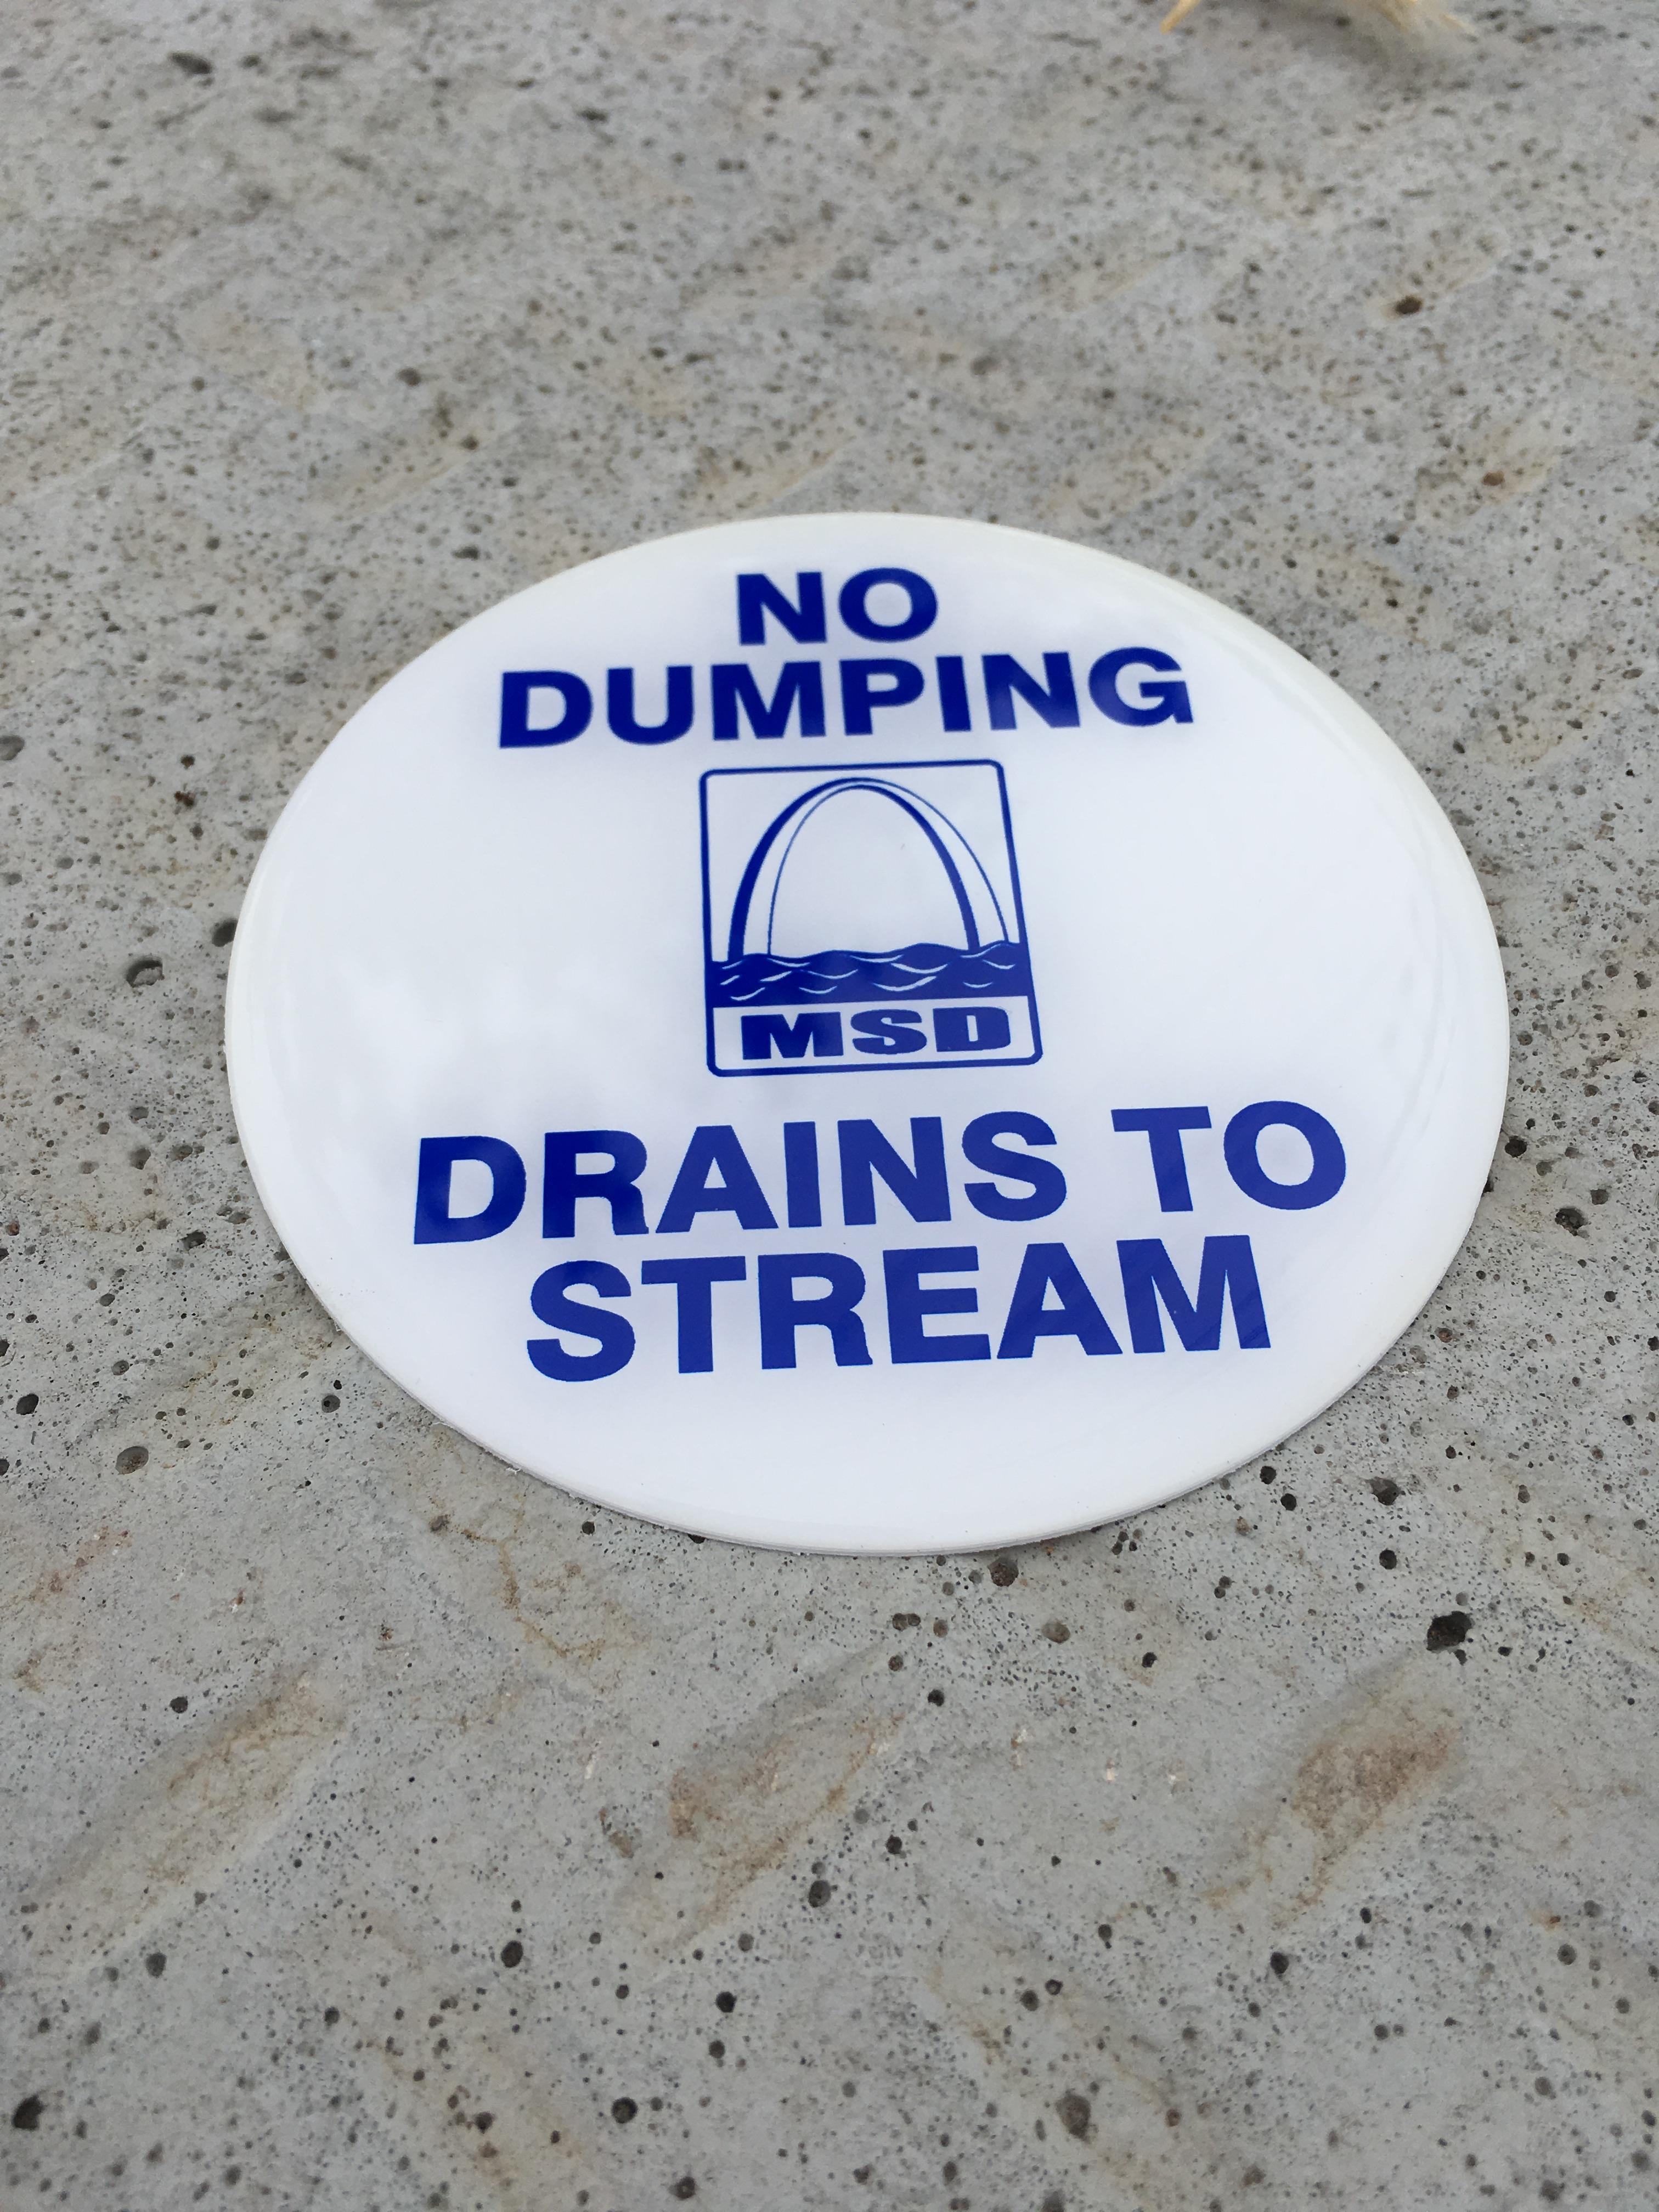 No Dumping--Drains to Stream sign